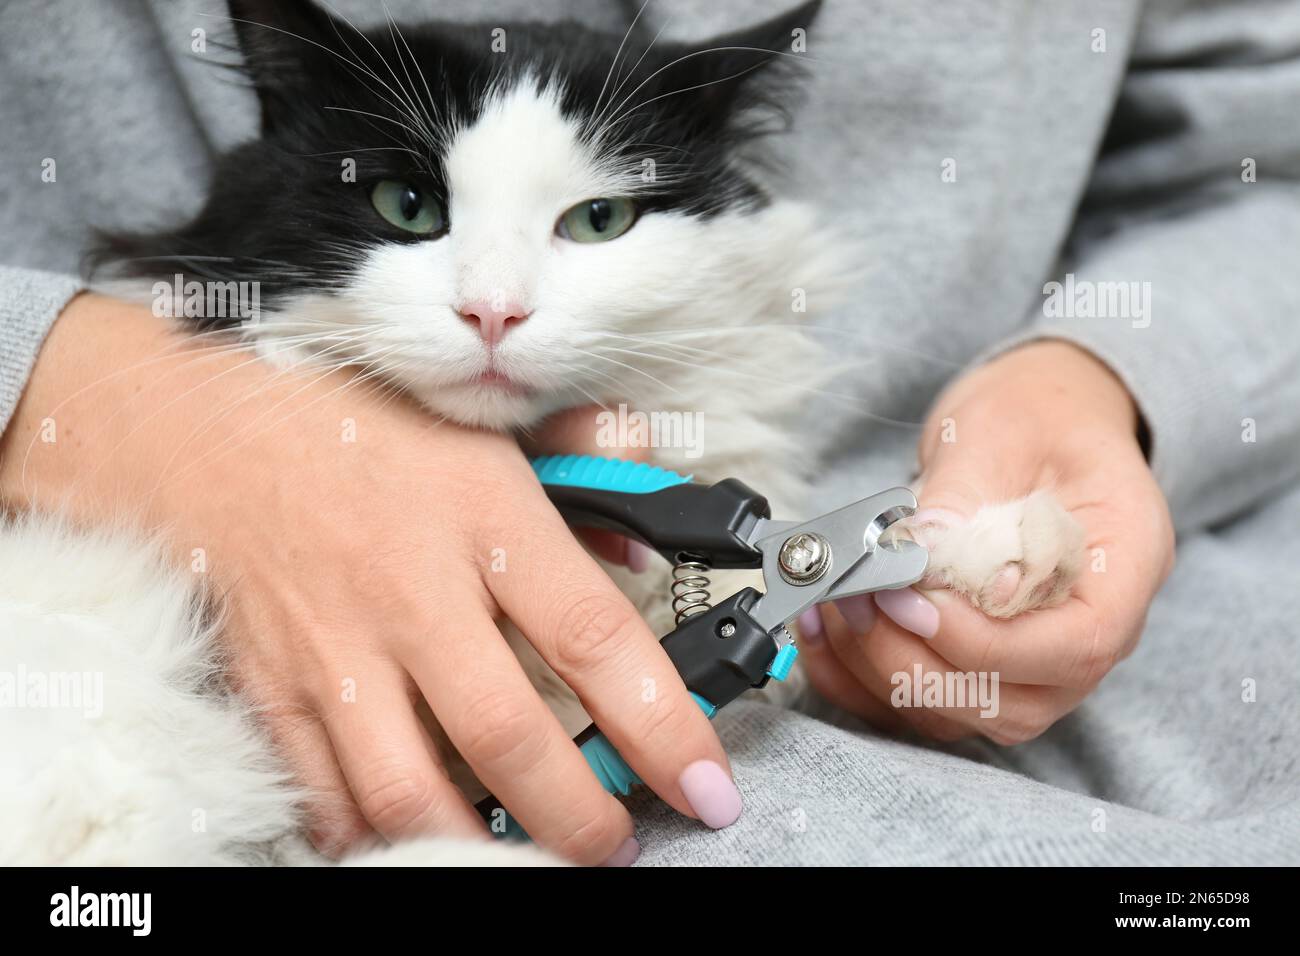 How to Trim Cat Nails: A Guide To Trimming Cat Claws | PetMD